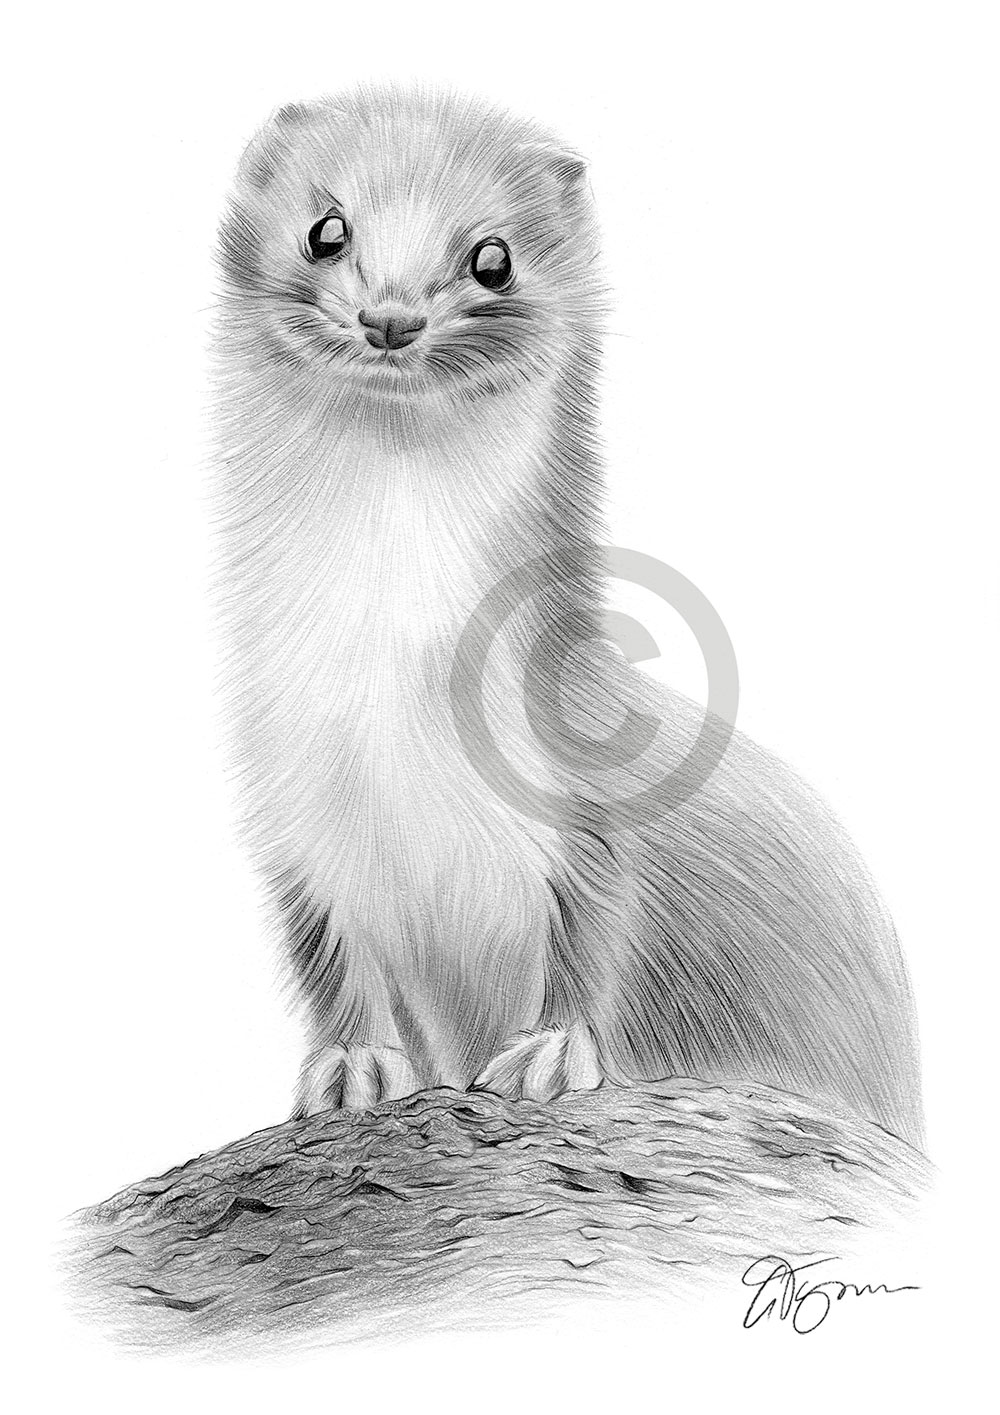 Pencil drawing of a weasel by artist Gary Tymon